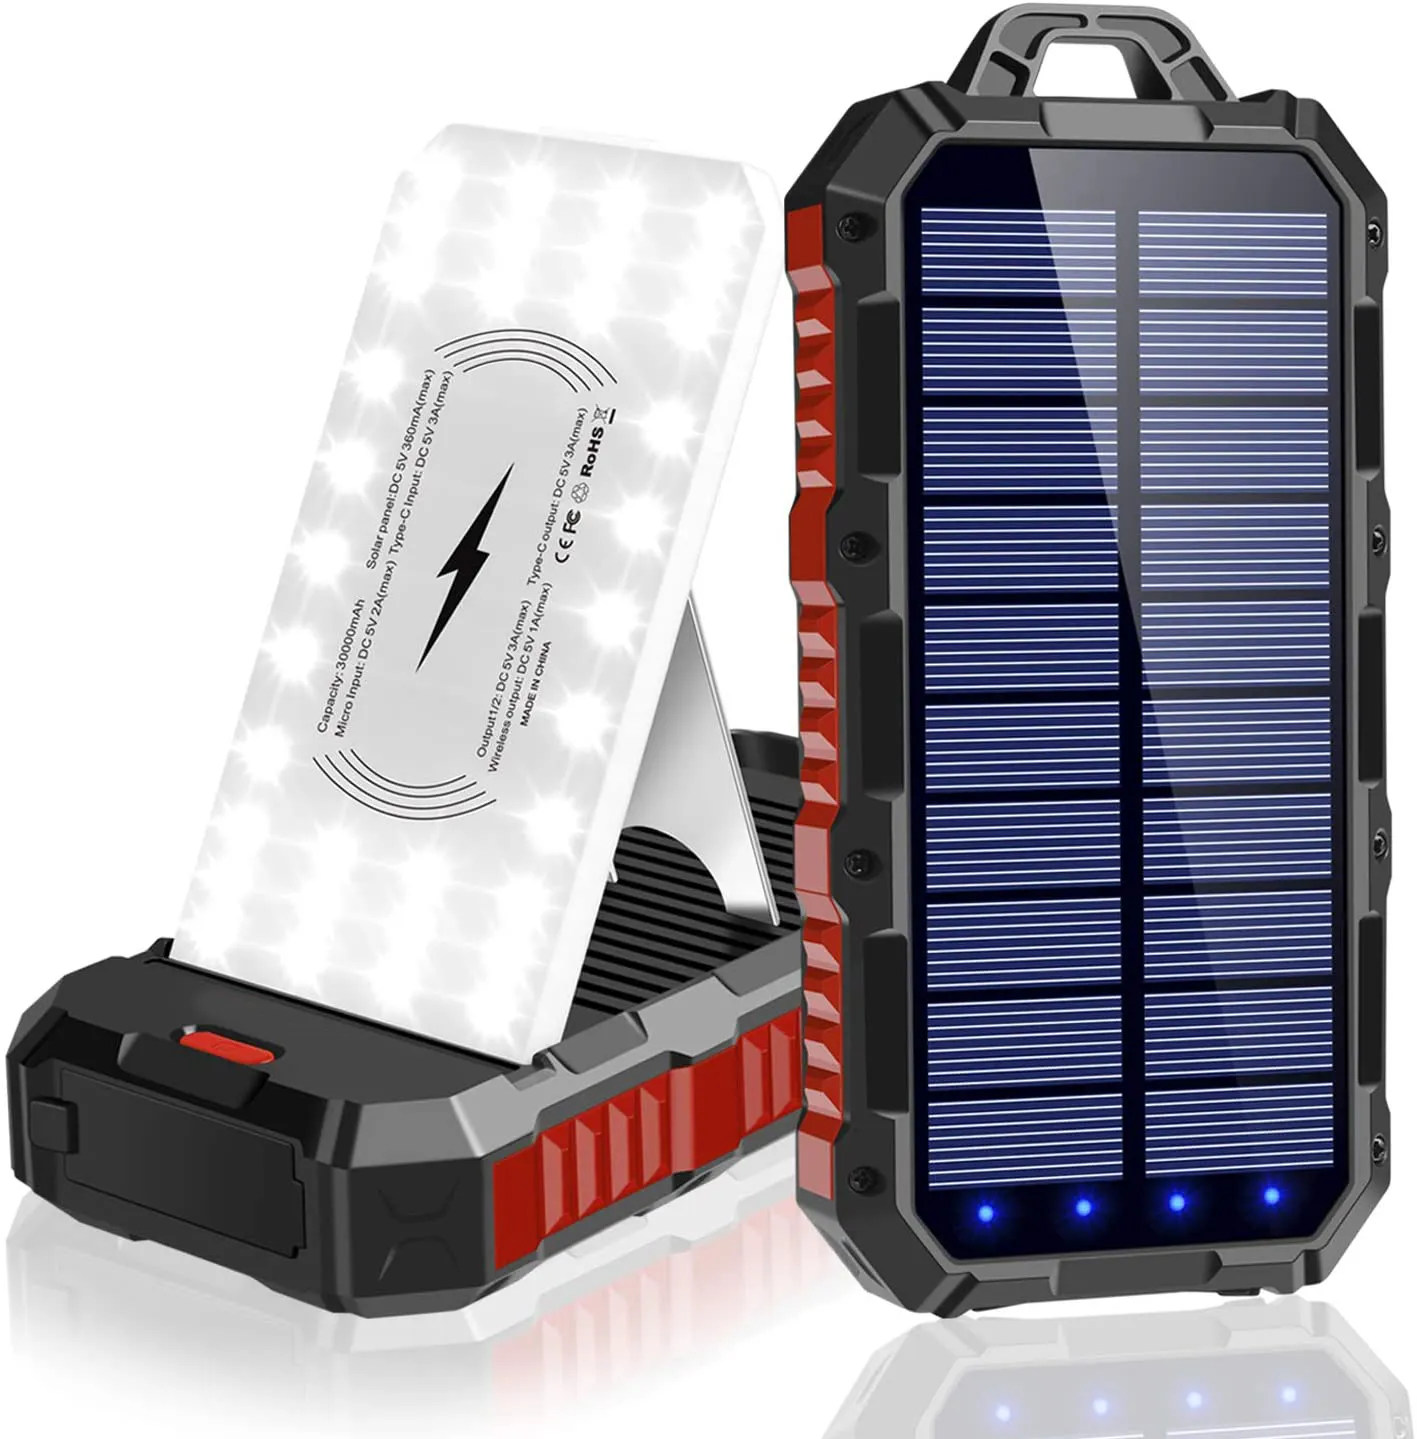 New Arrival Qi Portable Charger Solar Wireless With Mobile Phone Holder Power Bank